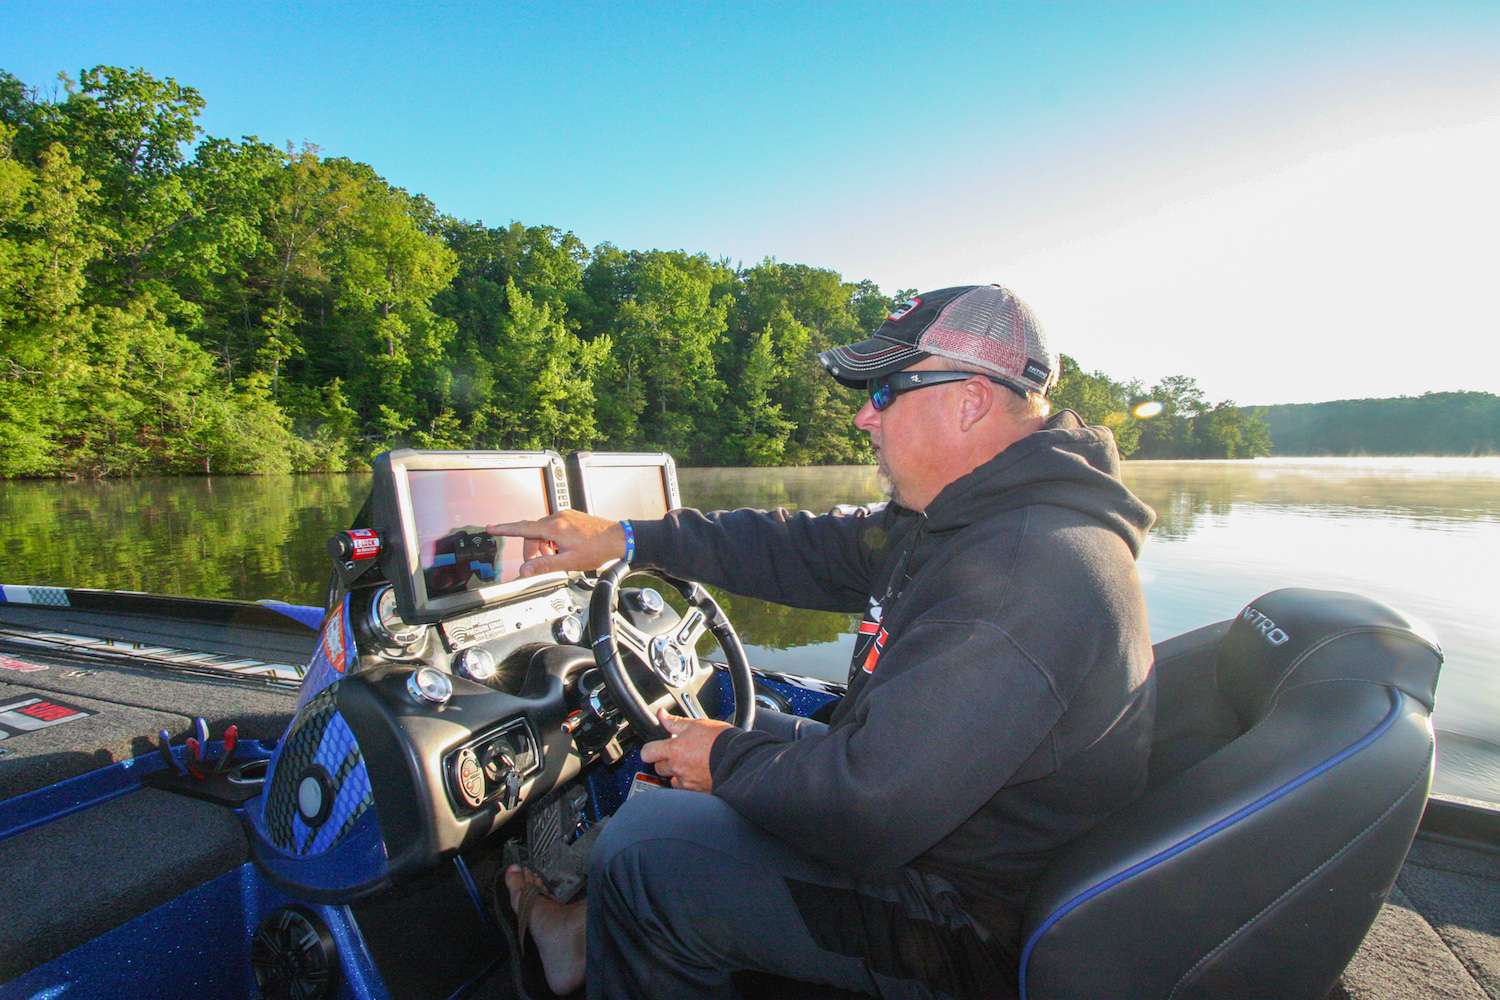 Jamie Hartman, like many professional anglers, has a love/hate relationship with bed fishing. âThereâs nothing more exciting than spotting a big bass up shallow on its spawning bed,â heâll tell you. âBut spawning bass can drive you absolutely crazy, too â theyâre driven by their need to procreate rather than hunger, so their hormones are raging and their behavior can be wildly unpredictable. Some spawners will smash your lure the instant it enters their nest; others seem totally oblivious to your presentations. That rock song âShould I Stay Or Should I Go?â by The Clash pretty much sums up whatâs constantly on your mind when youâre on a bed-fishing pattern in a tournament. When youâre 8 feet away from a fish that could bump up your weight total and net you a sizable paycheck, you naturally want to try every trick in the book to make it bite, but all the while that clock is going tick, tock, tick, tockâ¦â If bed fishing drives you crazy, too, hopefully what follows can bring some sense of order to the mysteries of the spawning season.
<p>

7 HOURS LEFT<br>
<b>6:38 a.m.</b> Itâs 55 degrees and clear when we arrive at Lake L. Hartman pulls several Cashion rods equipped with Lewâs and Shimano reels from storage. What pattern does he anticipate will be operative today? âBass donât all spawn at once, so some fish could be spawning while others are in the immediate postspawn phase. Either way, they should be shallow. My preference, and frankly my greatest strength, as a tournament angler is offshore fishing, but Iâll deal with whatever conditions I find.â<br>
<b>6:55 a.m.</b> We launch the Nitro. Lake L is dead calm. Hartman checks the water temp: 70 degrees. âThatâs leaning more toward postspawn, but the lake looks pretty clear, so if there are any bedding fish, we should be able to see âem. Having no cloud cover, I want to hit some shady spots first.â <br>
<b>7 a.m.</b> Hartman idles into a nearby cove and makes his first casts of the day with a bone-colored Heddon Zara Spook topwater stickbait. âPostspawn bass are usually sluggish, but theyâll hit a slow-moving surface bait like this Spook.â He scans the bottom for light-colored patches indicating spawning beds but doesnât spot any. <br>
<b>7:06 a.m.</b> Some baitfish are flipping on the surface. Hartman points to a light patch beneath an overhanging bush. âThat looks like a bed, but there are no fish on it.â <br>
<b>7:11 a.m.</b> Hartman moves a Â­quarter-mile uplake and dog-walks the Spook around the mouth of a short tributary arm. <br>
<b>7:14 a.m.</b> He switches to a half-ounce white Recon bladed jig with a matching Tattle Tail trailer, both by Riot Baits. <br>
<b>7:15 a.m.</b> Hartman rigs a green pumpkin Riot Baits Fuzzy Beaver creature on a 4/0 straight-shank hook with a 3/8-ounce tungsten sinker, unpegged. âI donât peg my sinkers during spawning season. I donât want the fish to feel any weight when it picks up the lure to carry it off the nest.â He flips the creature into a laydown tree. <br>
<b>7:17 a.m.</b> Back to the bladed jig. He spots a keeper fish on a bed and marks its waypoint on his GPS. âIâll check back here later to see if his big girlfriend has moved onto the nest.â
<b>7:19 a.m.</b> Hartman moves to the back of the cove and chunks a Strike King KVD 1.5 squarebill crankbait (copper perch) to shoreline cover. <br>





<b>7:24 a.m.</b> He flips the creature to a submerged tree. <br>
<b>7:37 a.m.</b> Moving to the opposite shore of the cove, Hartman flips the creature to a series of laydowns. âThis cover looks good from a distance, but a lot of it is really shallow.â <br>
<b>7:51 a.m.</b> Hartman races to the lower end of the lake and flips scattered wood with a generic green pumpkin brush hog creature.
<p>

6 HOURS LEFT<br>
<b>7:55 a.m.</b> Nearing the dam, Hartman cranks riprap with the squarebill. âThese rocks are mainly piled up along shore and donât run out into the lake very far.â <br>
<b>8:01 a.m.</b> He pitches the brush hog to the dam, gets a tap, swings and misses. âJust nipped the tail.â <br>
<b>8:06 a.m.</b> Hartman cranks the 1.5 parallel to the dam. âIt drops off to 12 feet fast here, and this lure runs too shallow to hit bottom. A squarebill is pretty much useless if it isnât deflecting off something.â <br>
